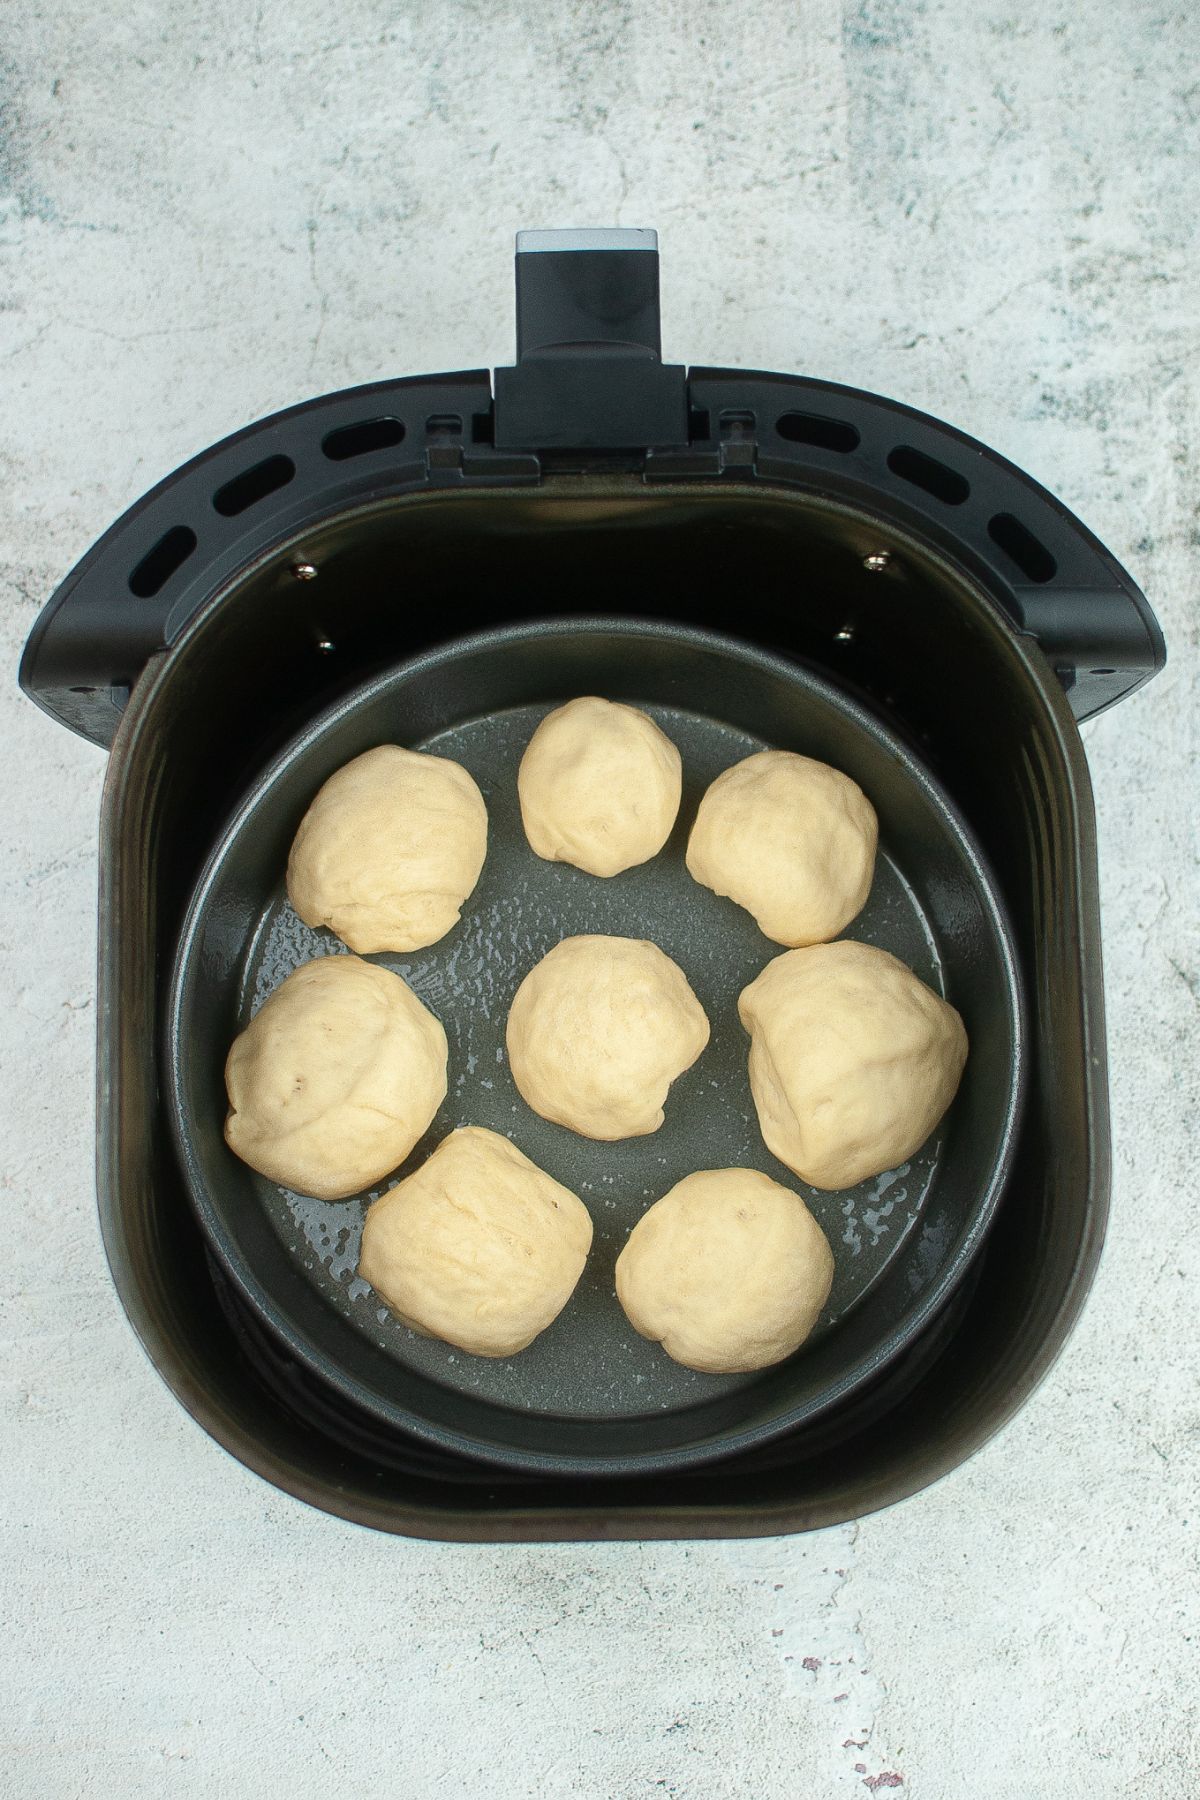 raw dough in a metal pan on the air fryer basket